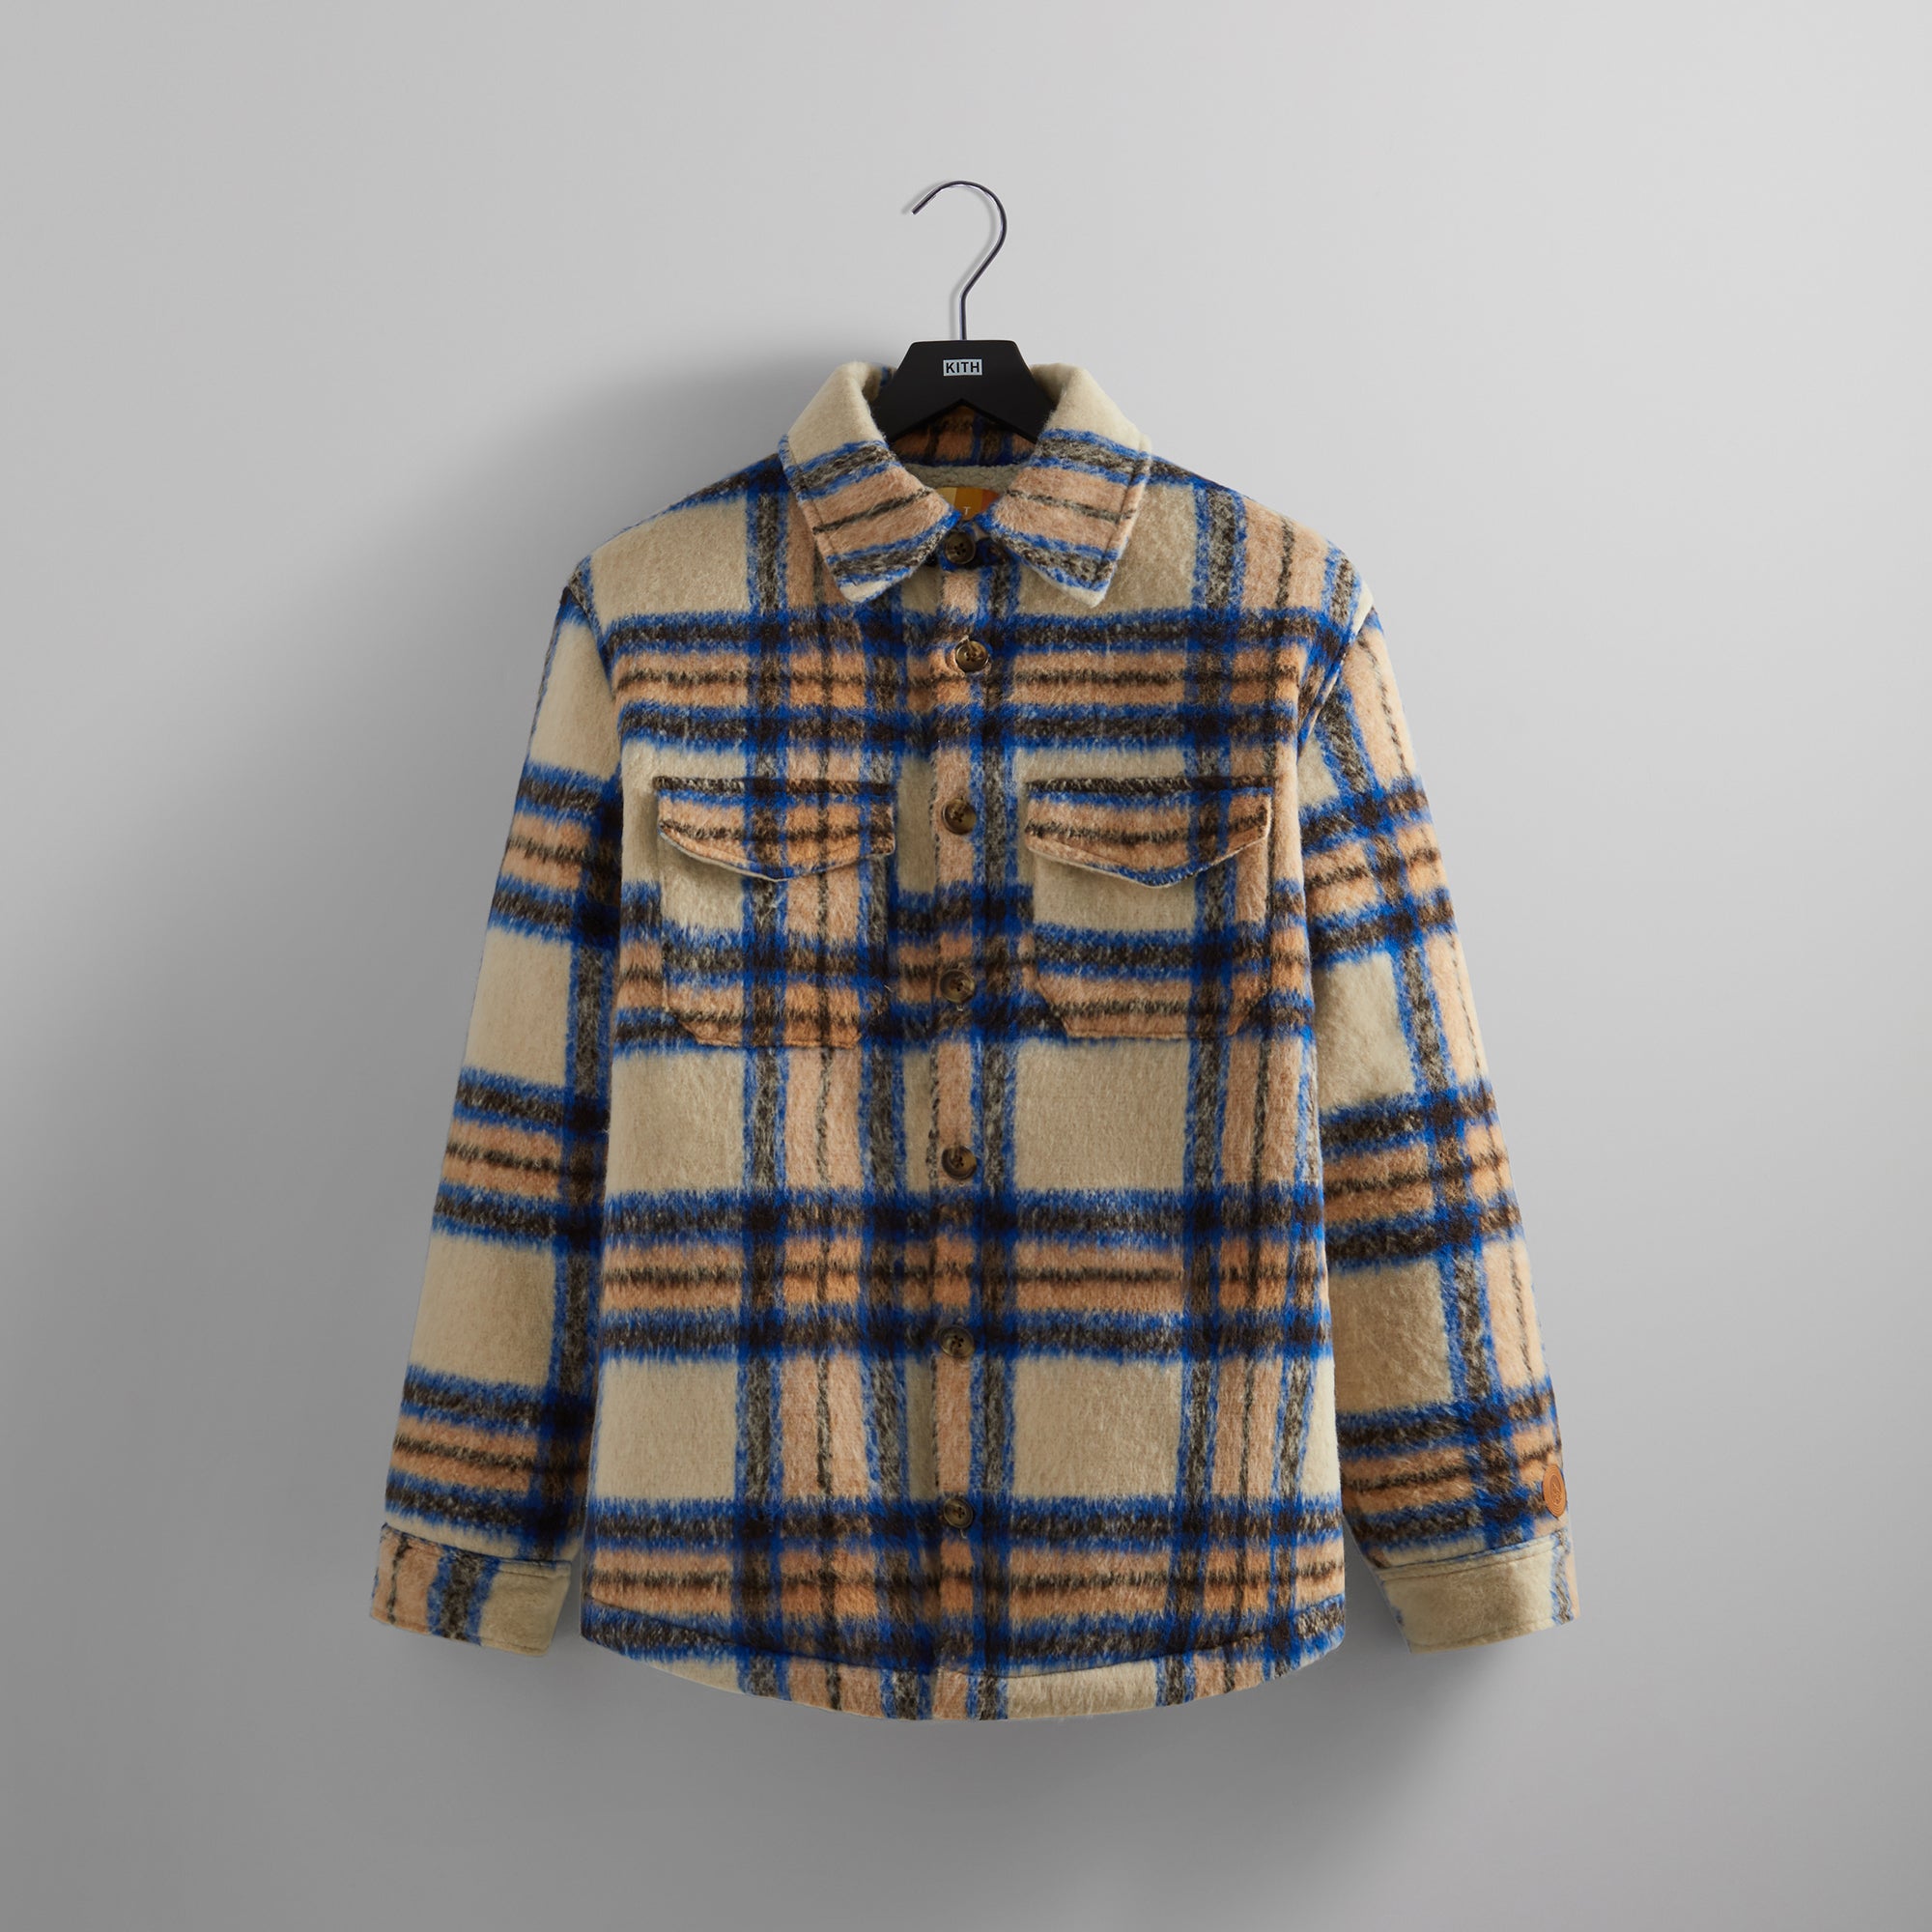 SOOK: Shopping Discovery: Find & Buy Direct: Kith Sheridan Shirt